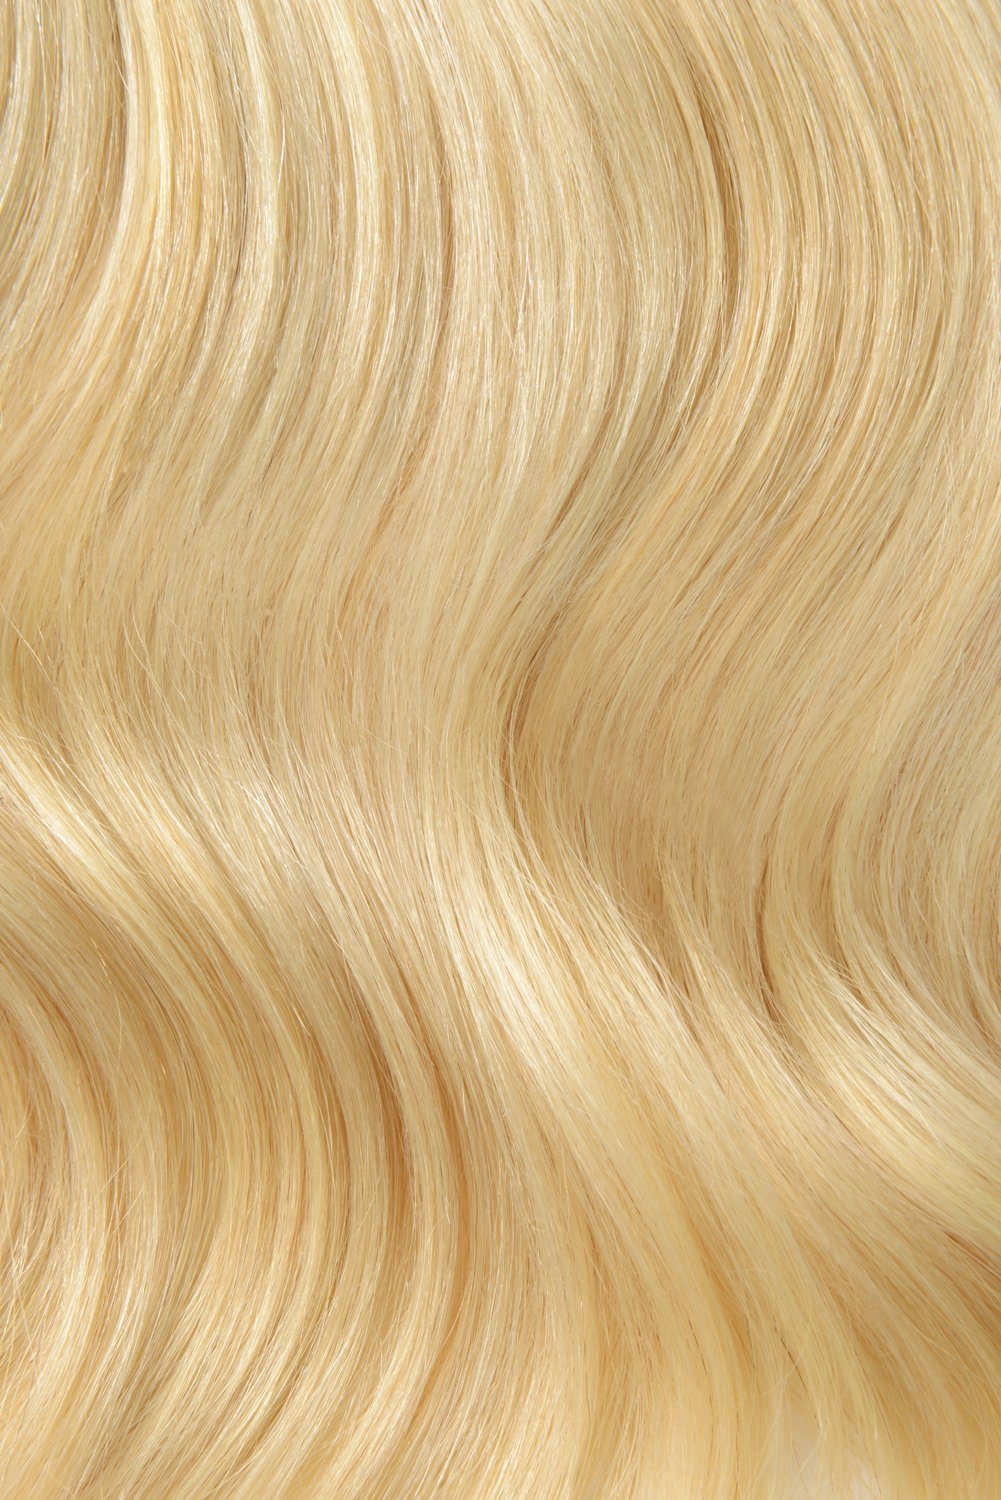 Double Wefted Full Head Remy Clip in Human Hair Extensions - Creamy Blonde (#22/613)